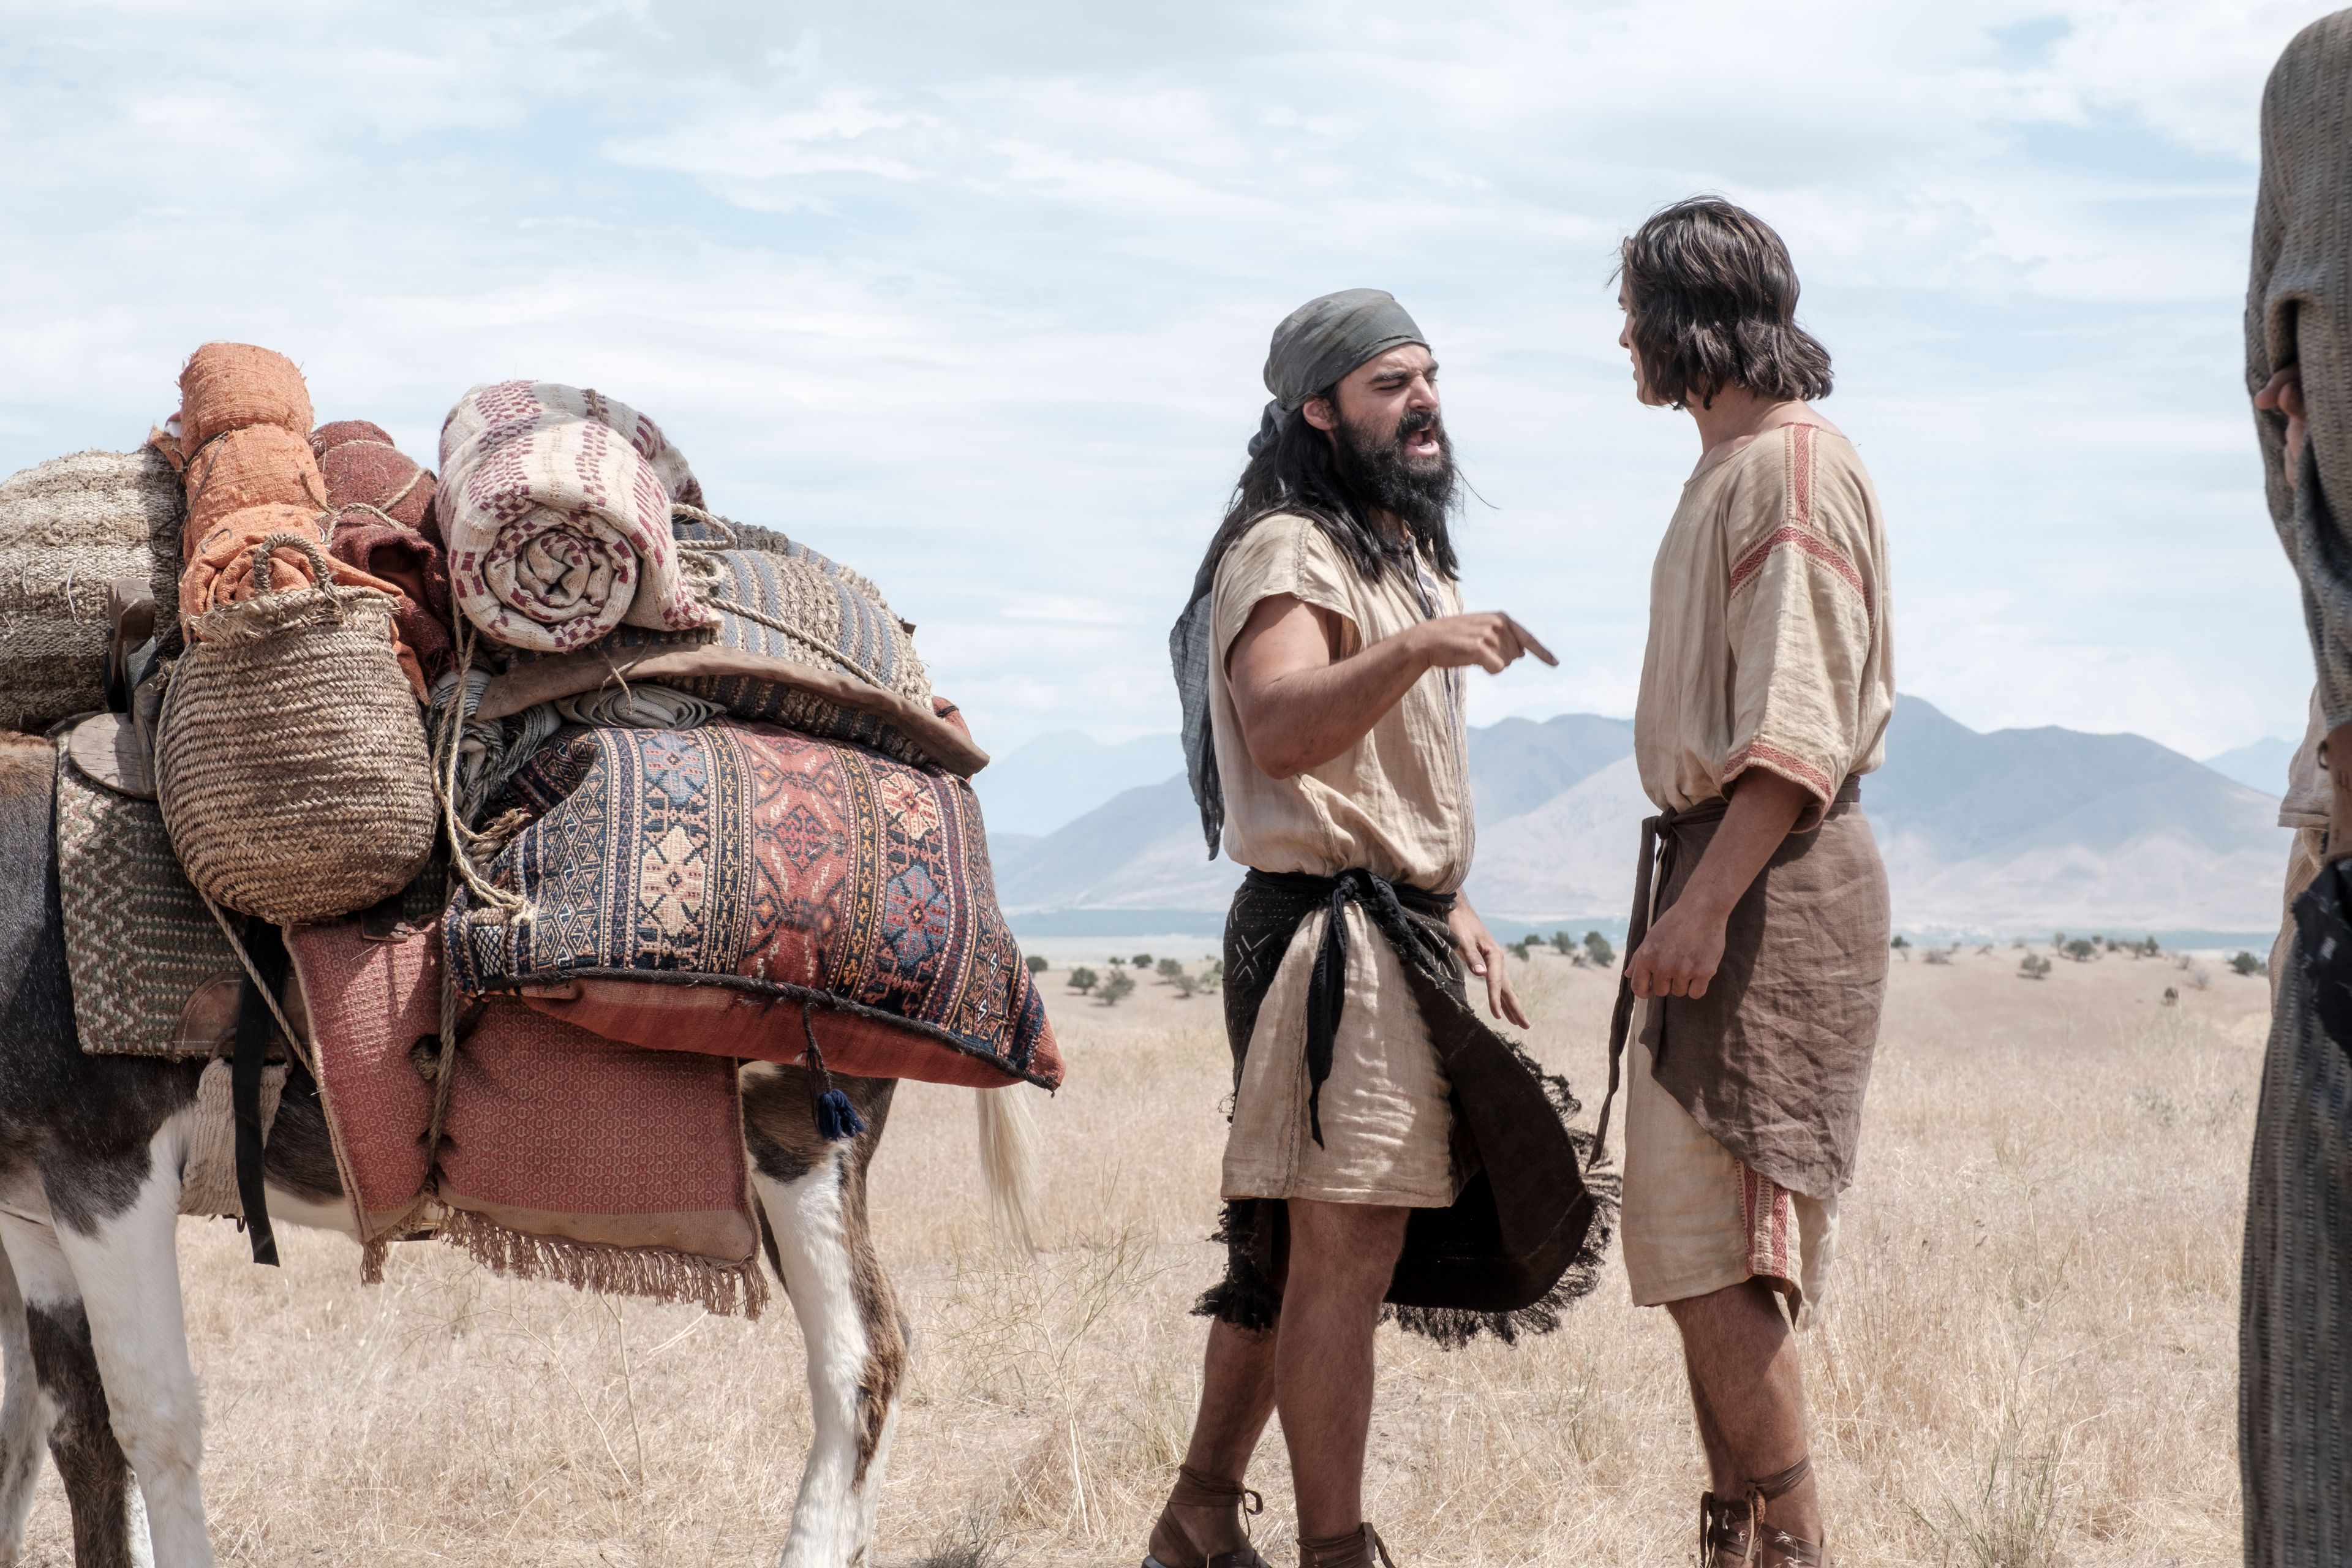 Laman and Nephi argue in the wilderness.